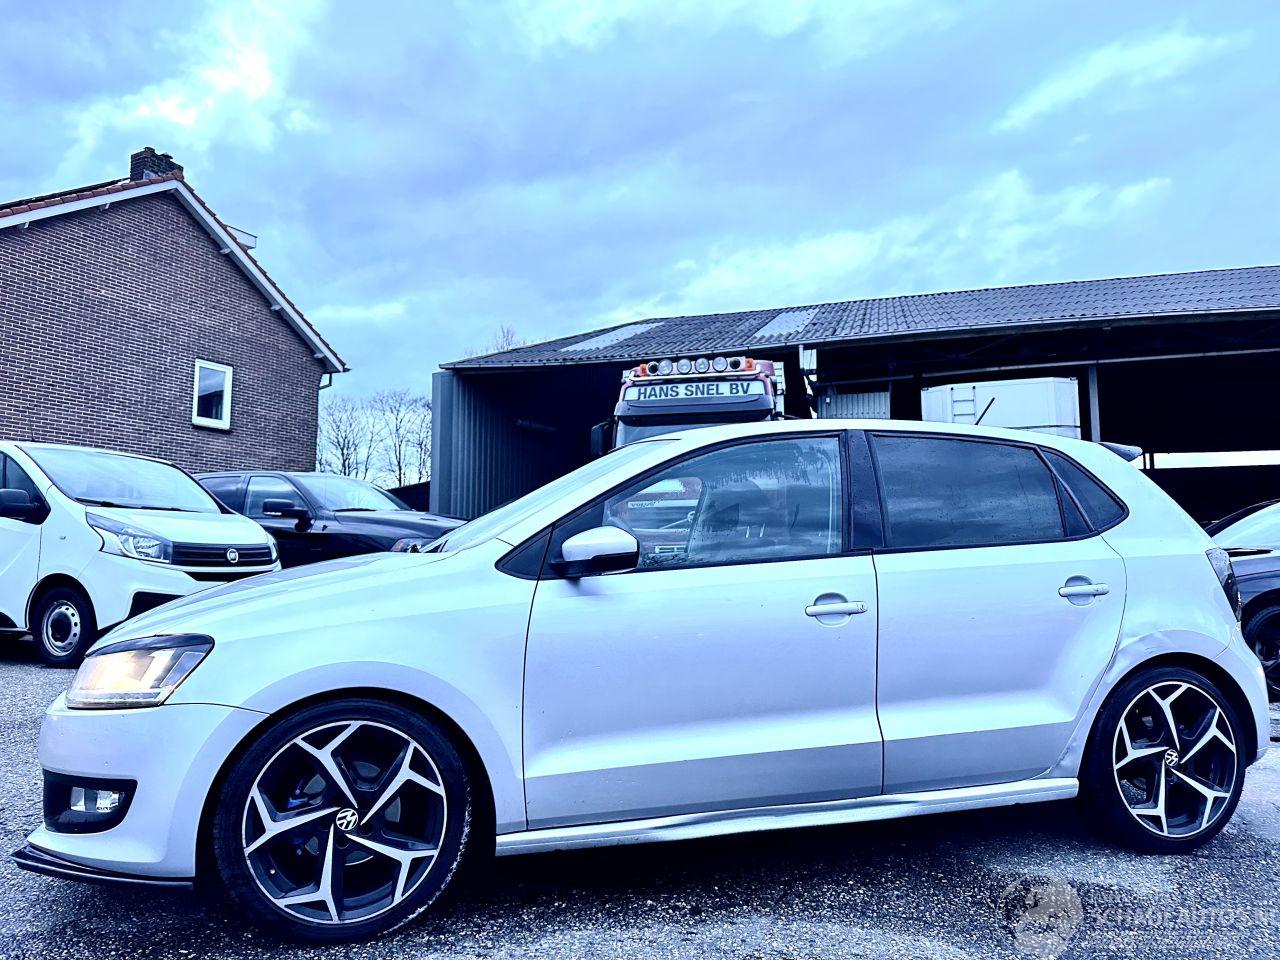 Volkswagen Polo 1.2 TSI 90pk 5drs - nap - navi - clima - cruise - pdc - JD Engineering - maxton - led voor + achter